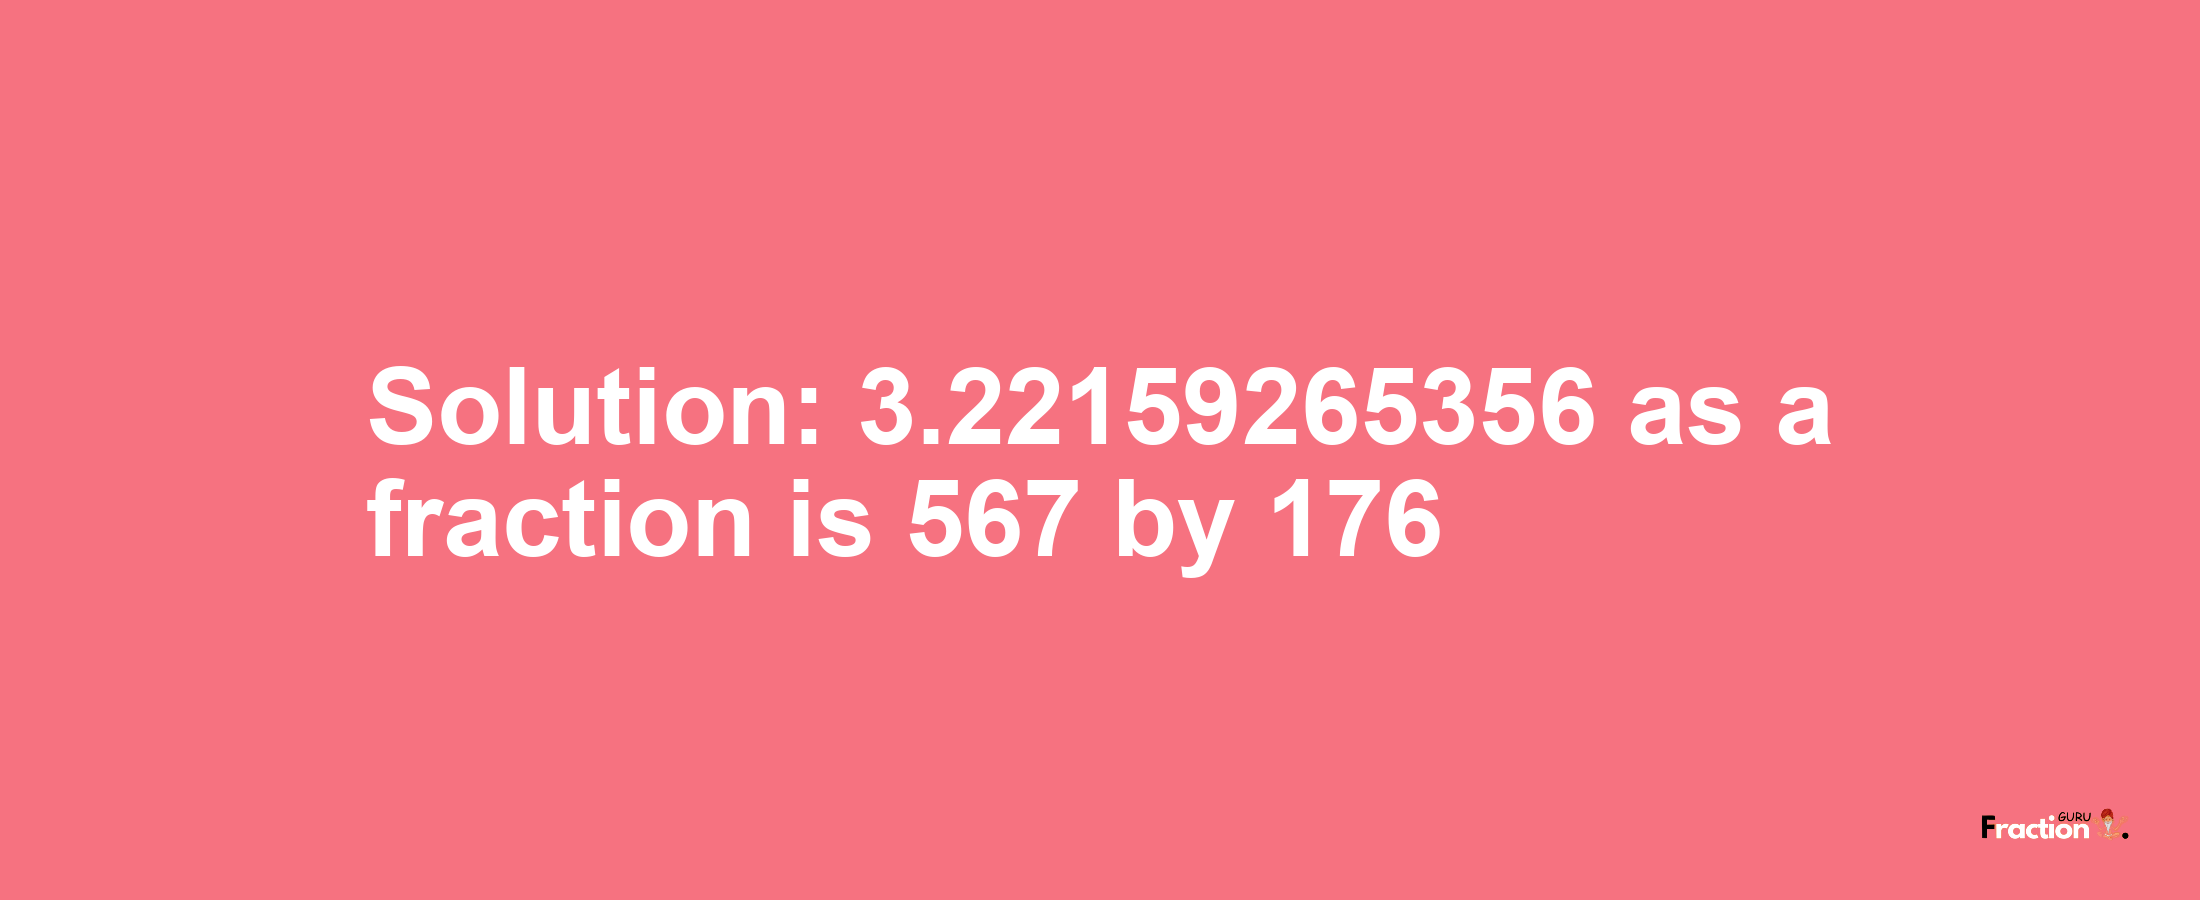 Solution:3.22159265356 as a fraction is 567/176